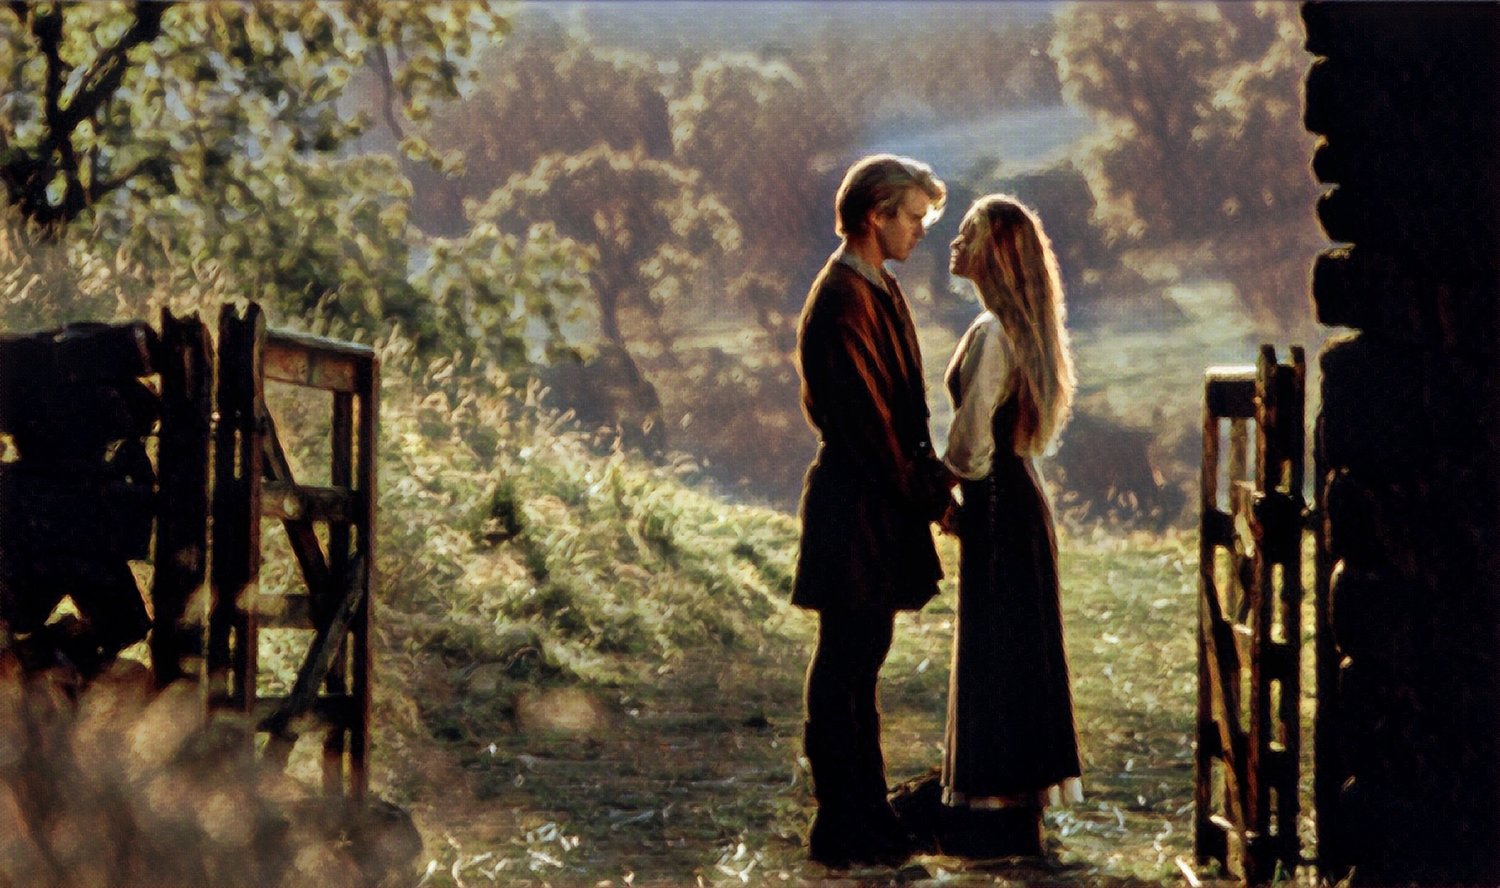 The Princess Bride, minutes 90 to 92